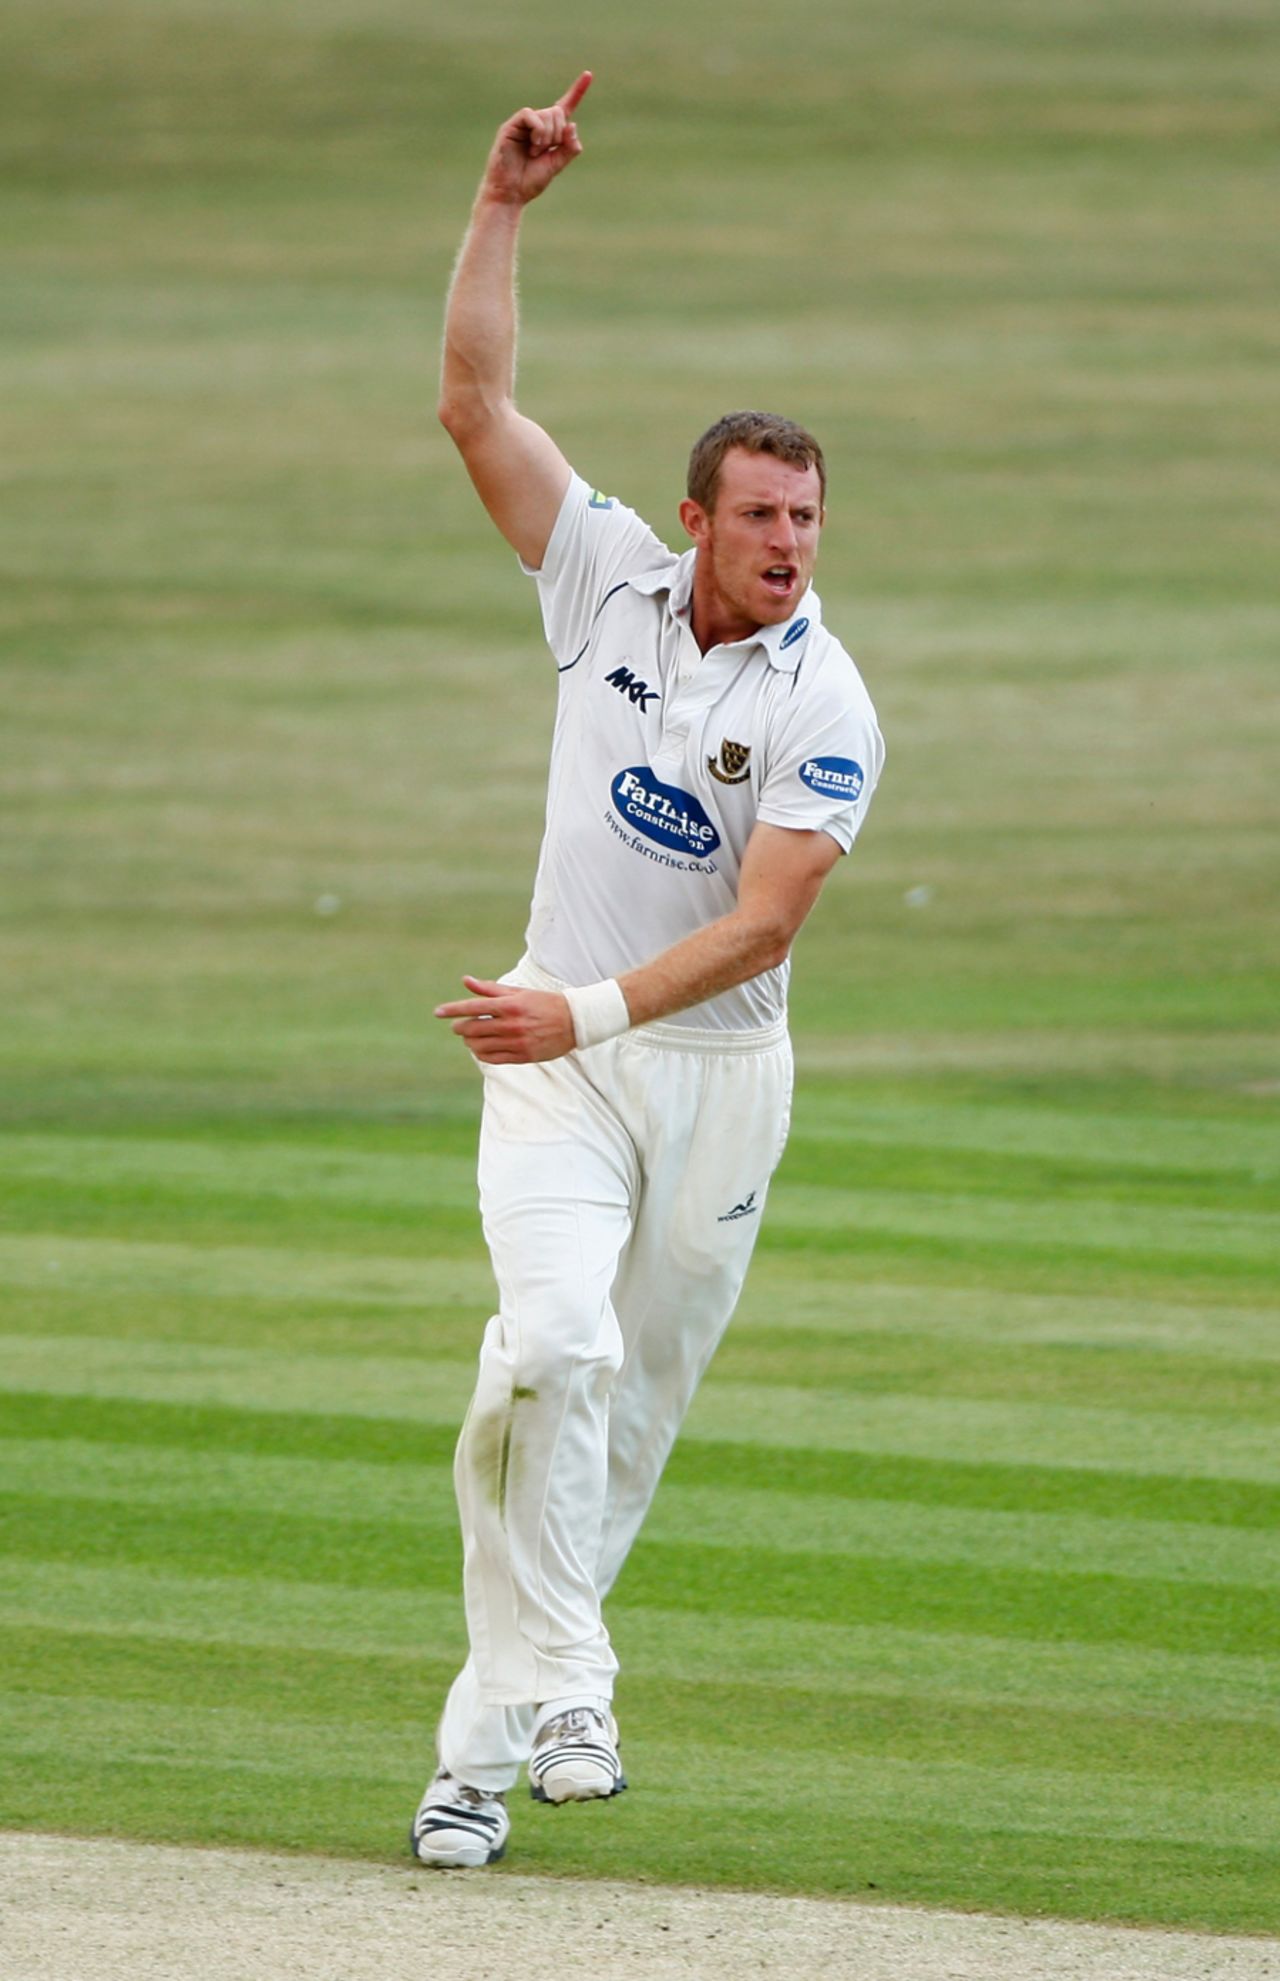 James Anyon celebrates a wicket against Hampshire, Sussex v Hampshire, County Championship Division One, Hove, July 11 2011